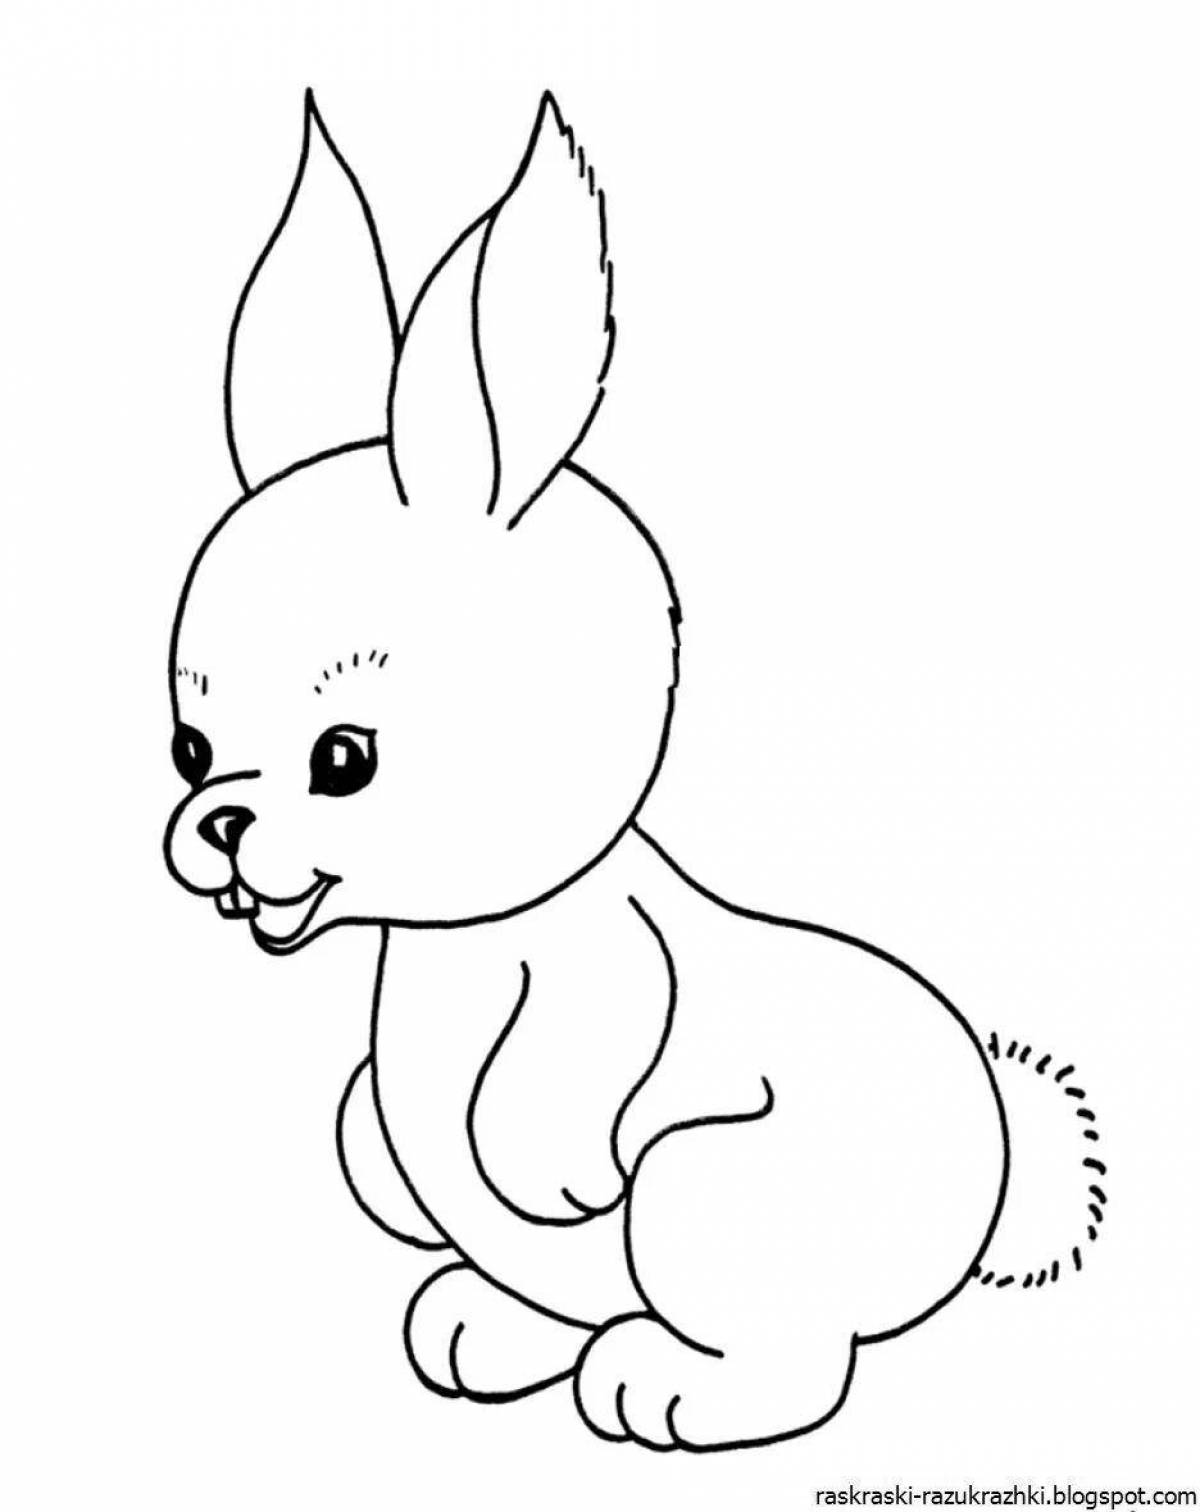 Creative bunny drawing for kids